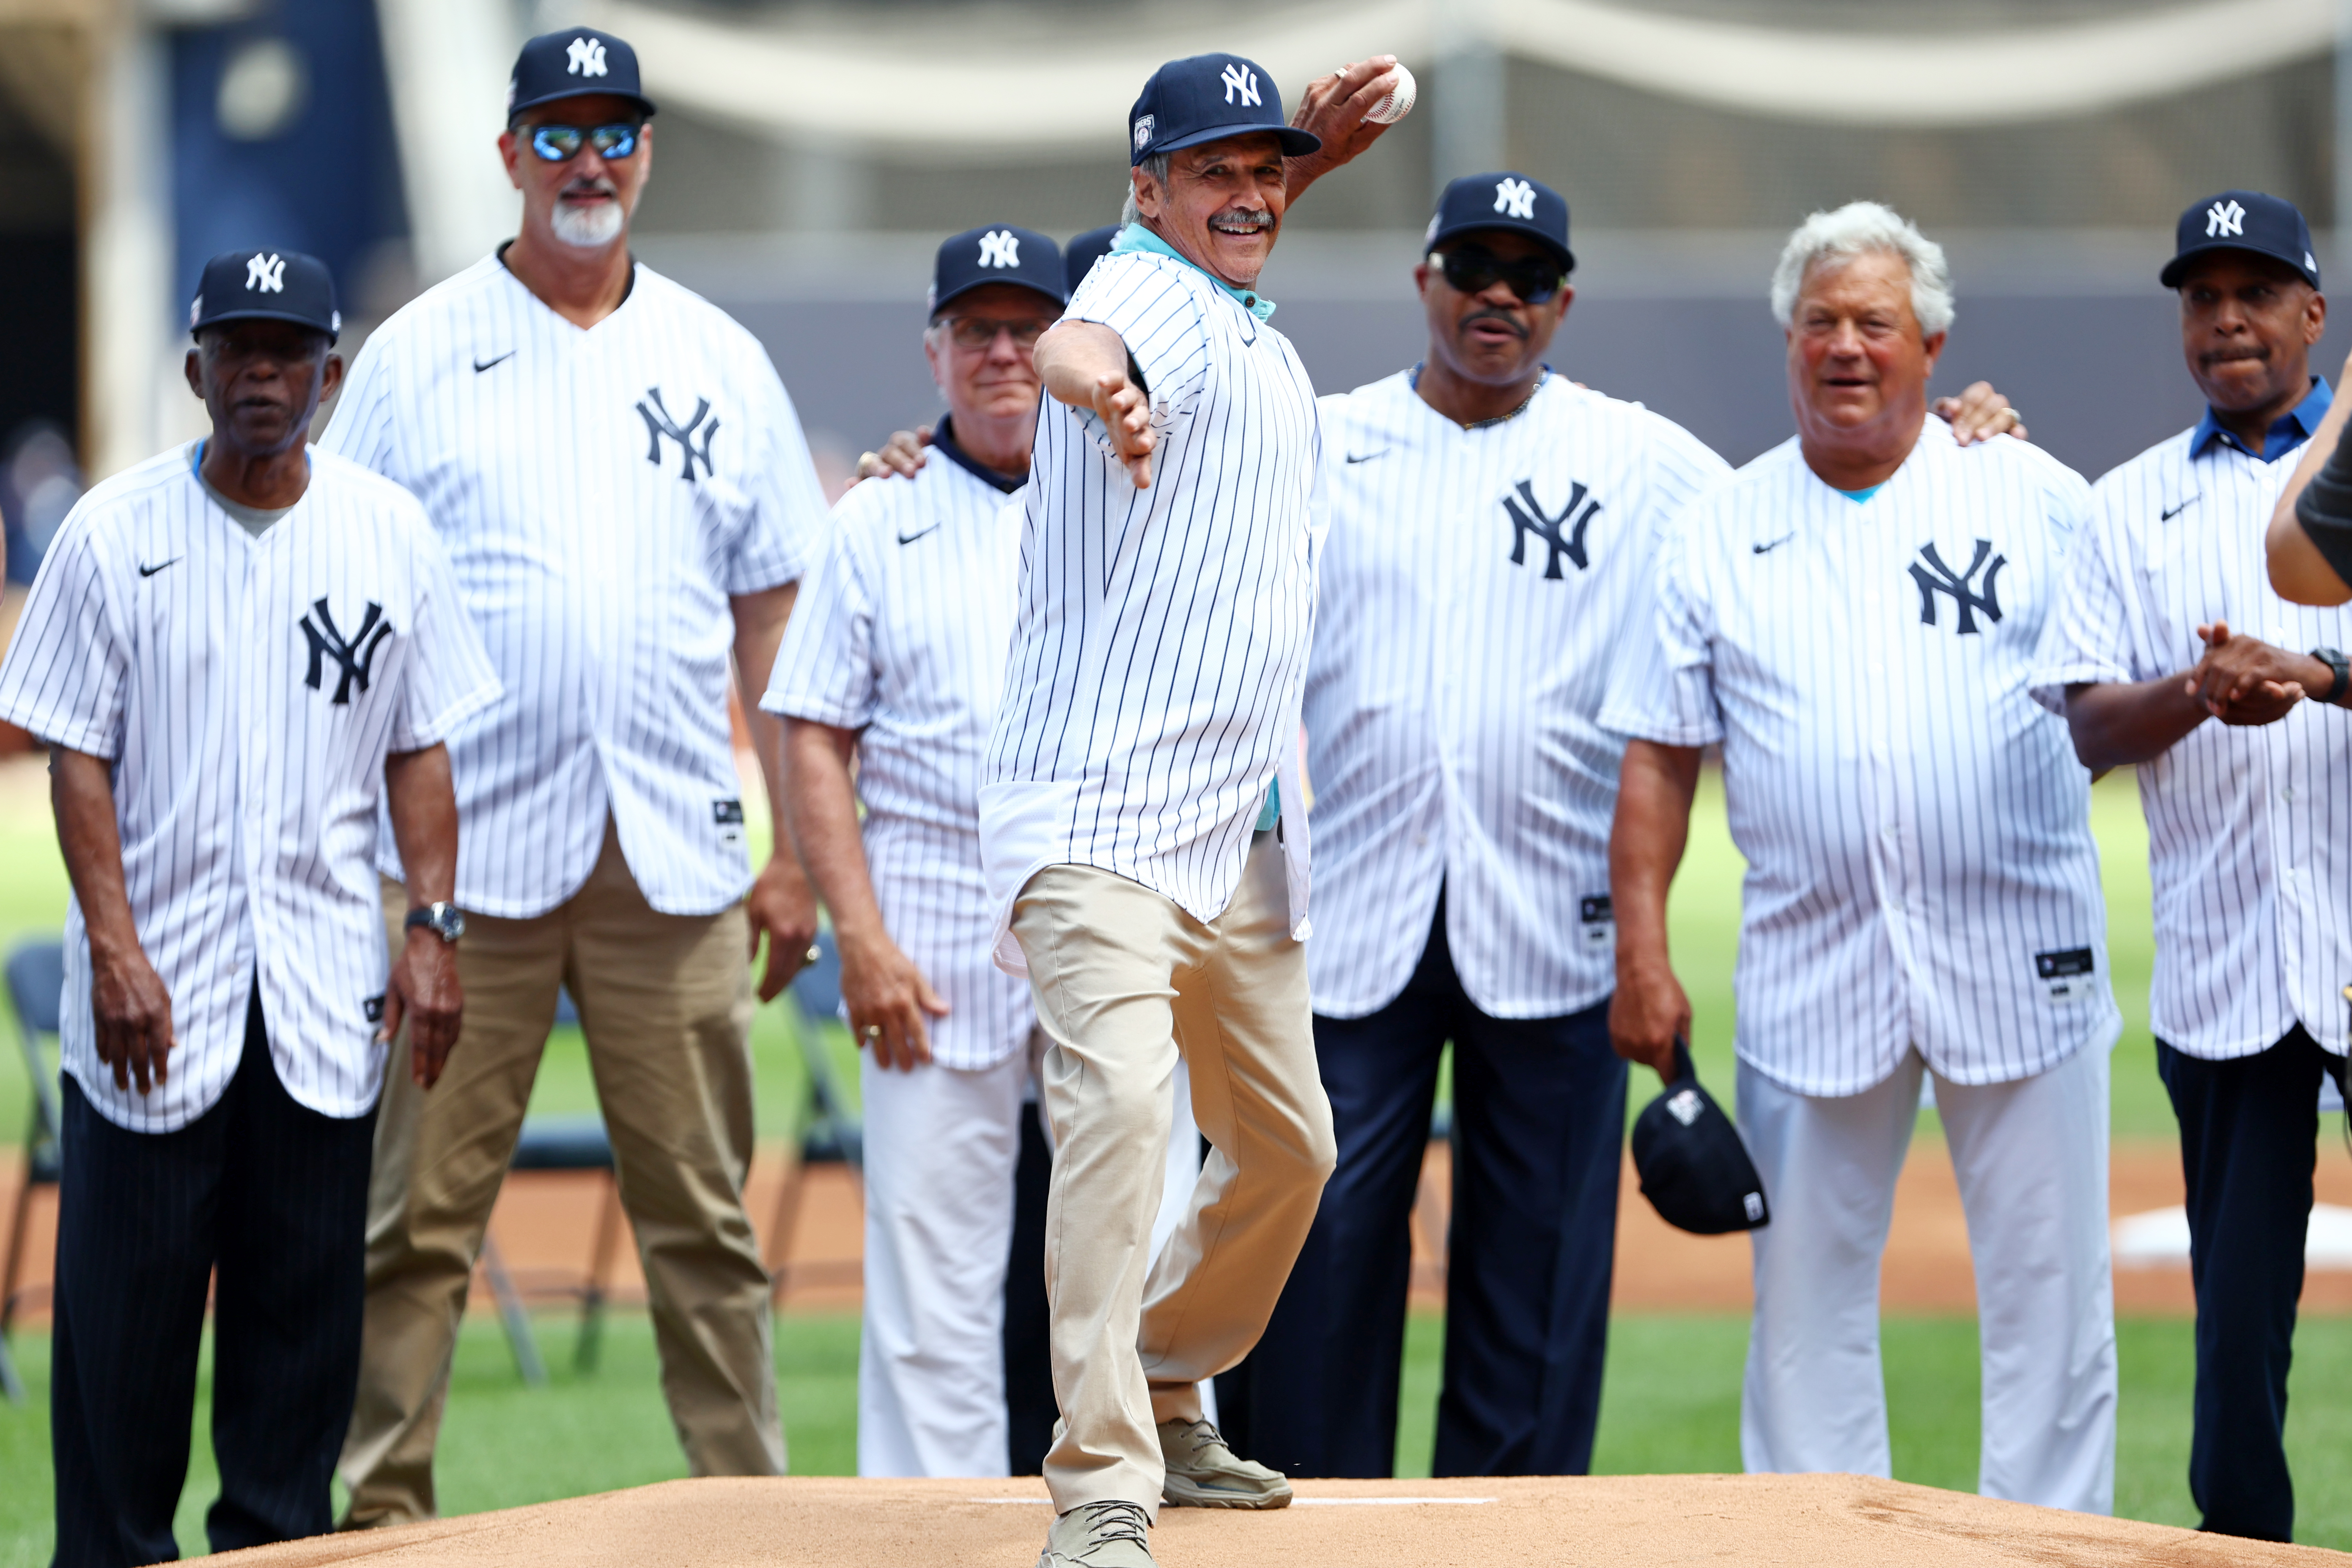 Yankees Resume Annual Old-Timers' Day After Pandemic Pause – NBC